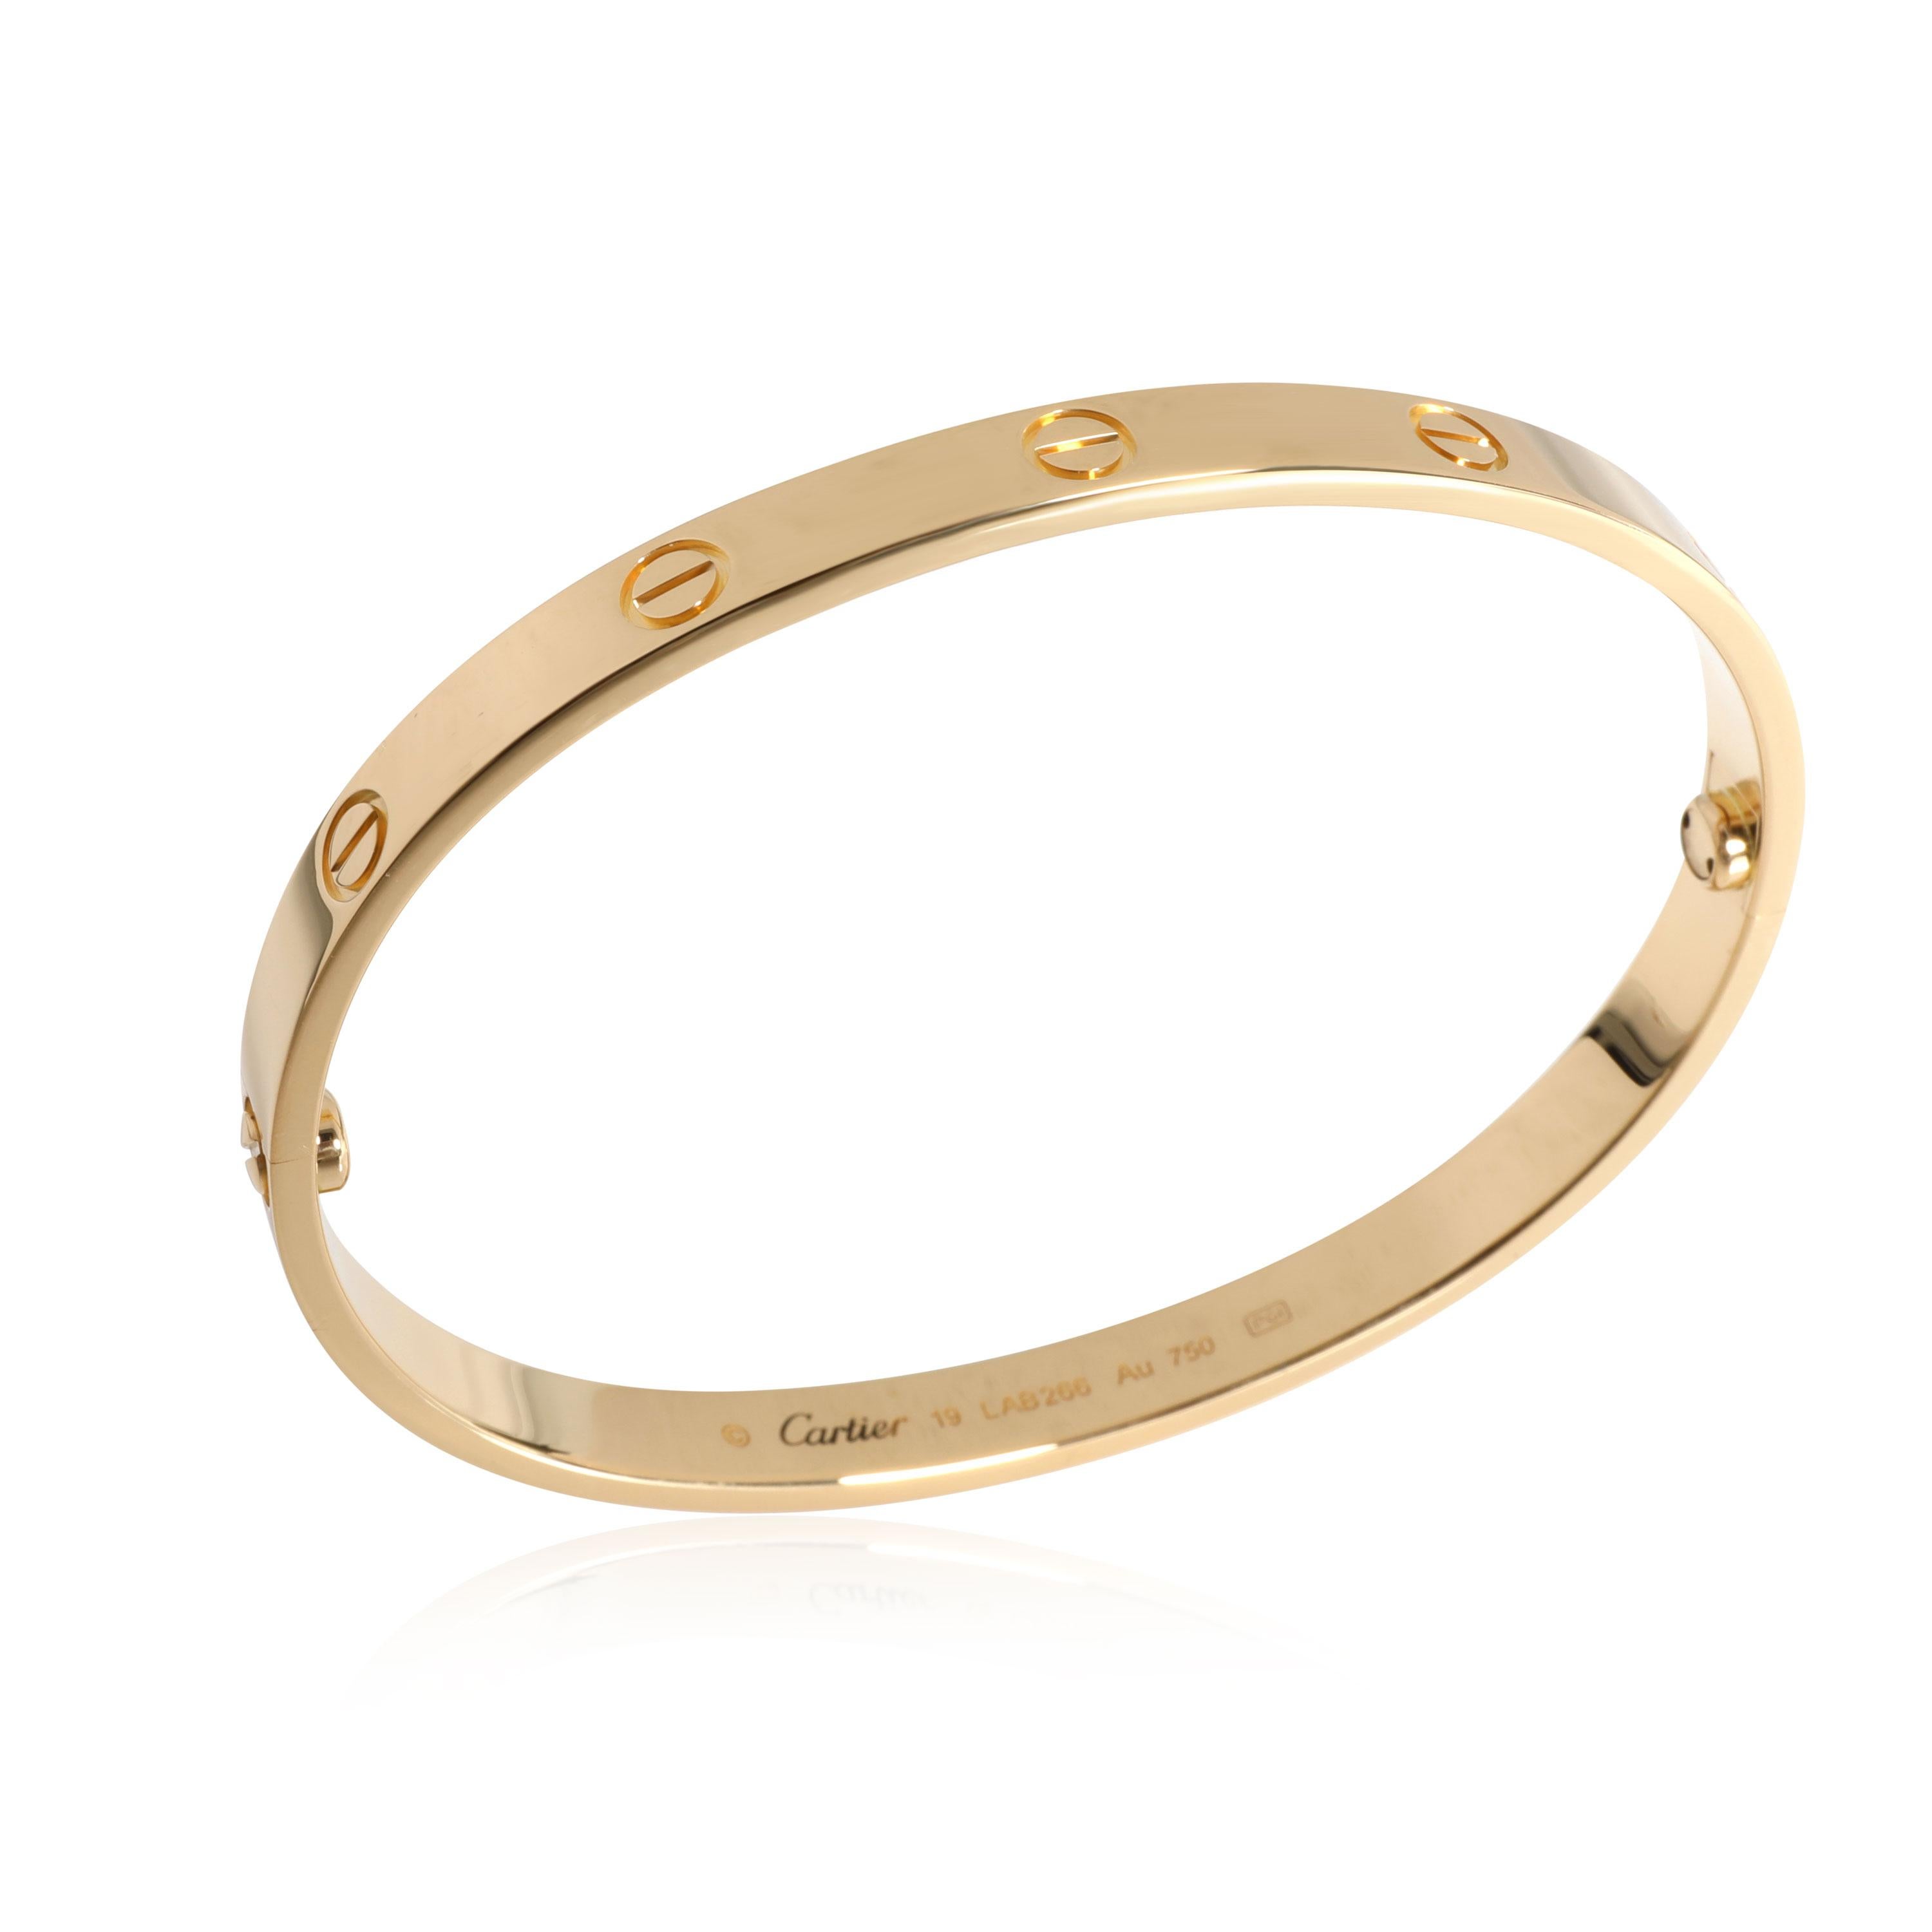 Cartier Love Bracelet in 18k Yellow Gold

PRIMARY DETAILS
SKU: 113344
Listing Title: Cartier Love Bracelet in 18k Yellow Gold
Condition Description: Retails for 6,900 USD. In excellent condition and recently polished. Bracelet size is 19. Comes with